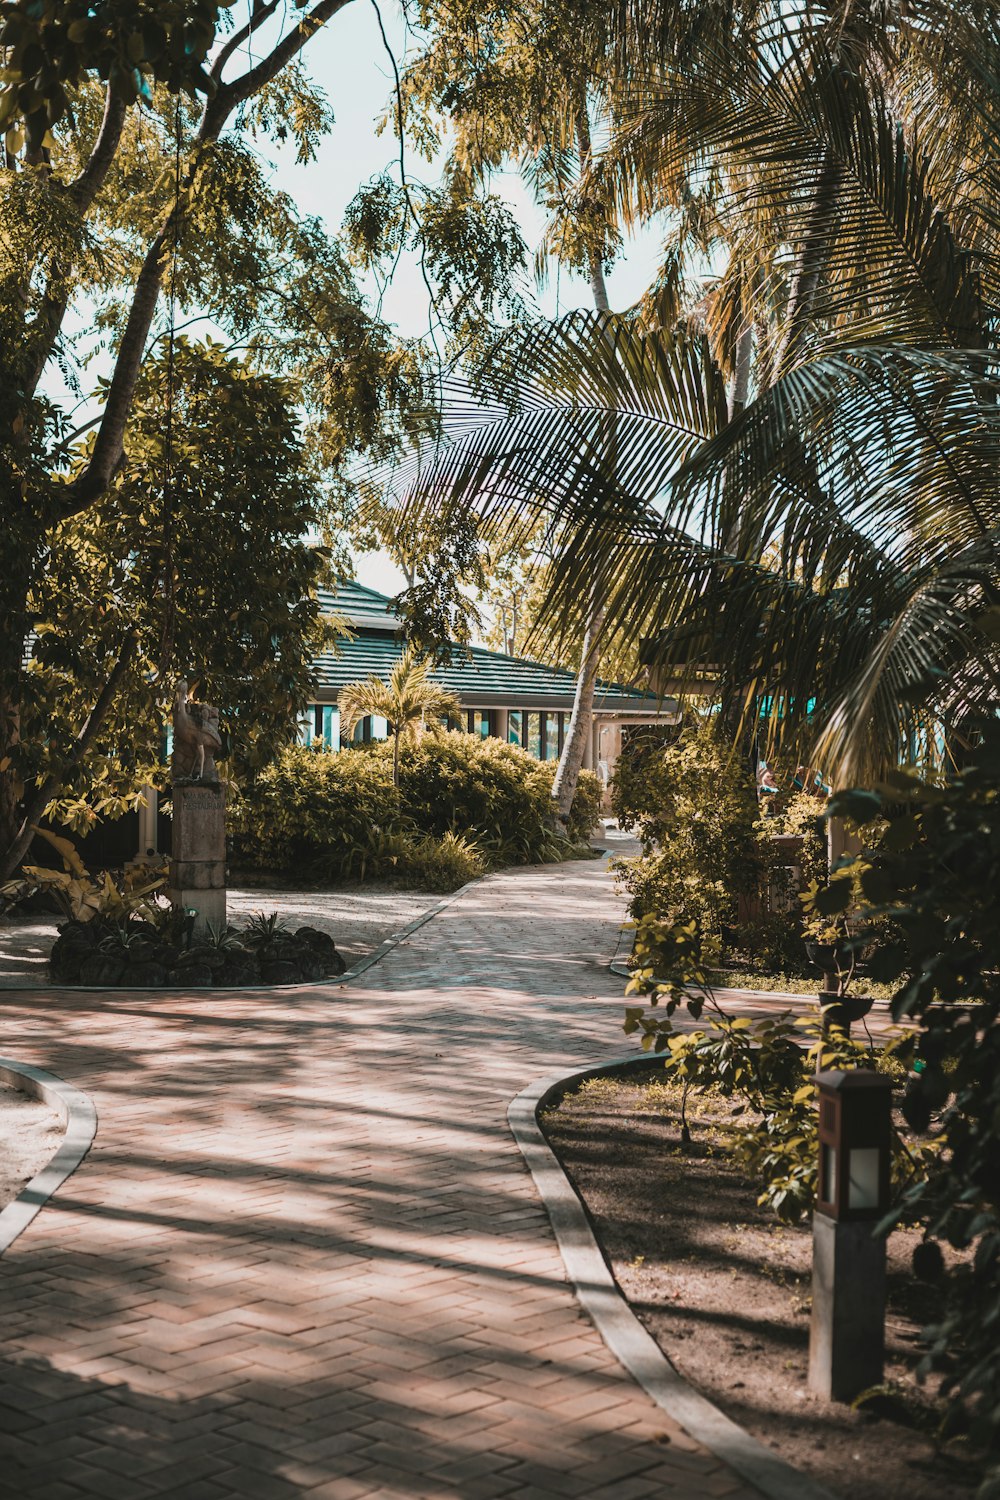 a brick walkway with palm trees and a building in the background